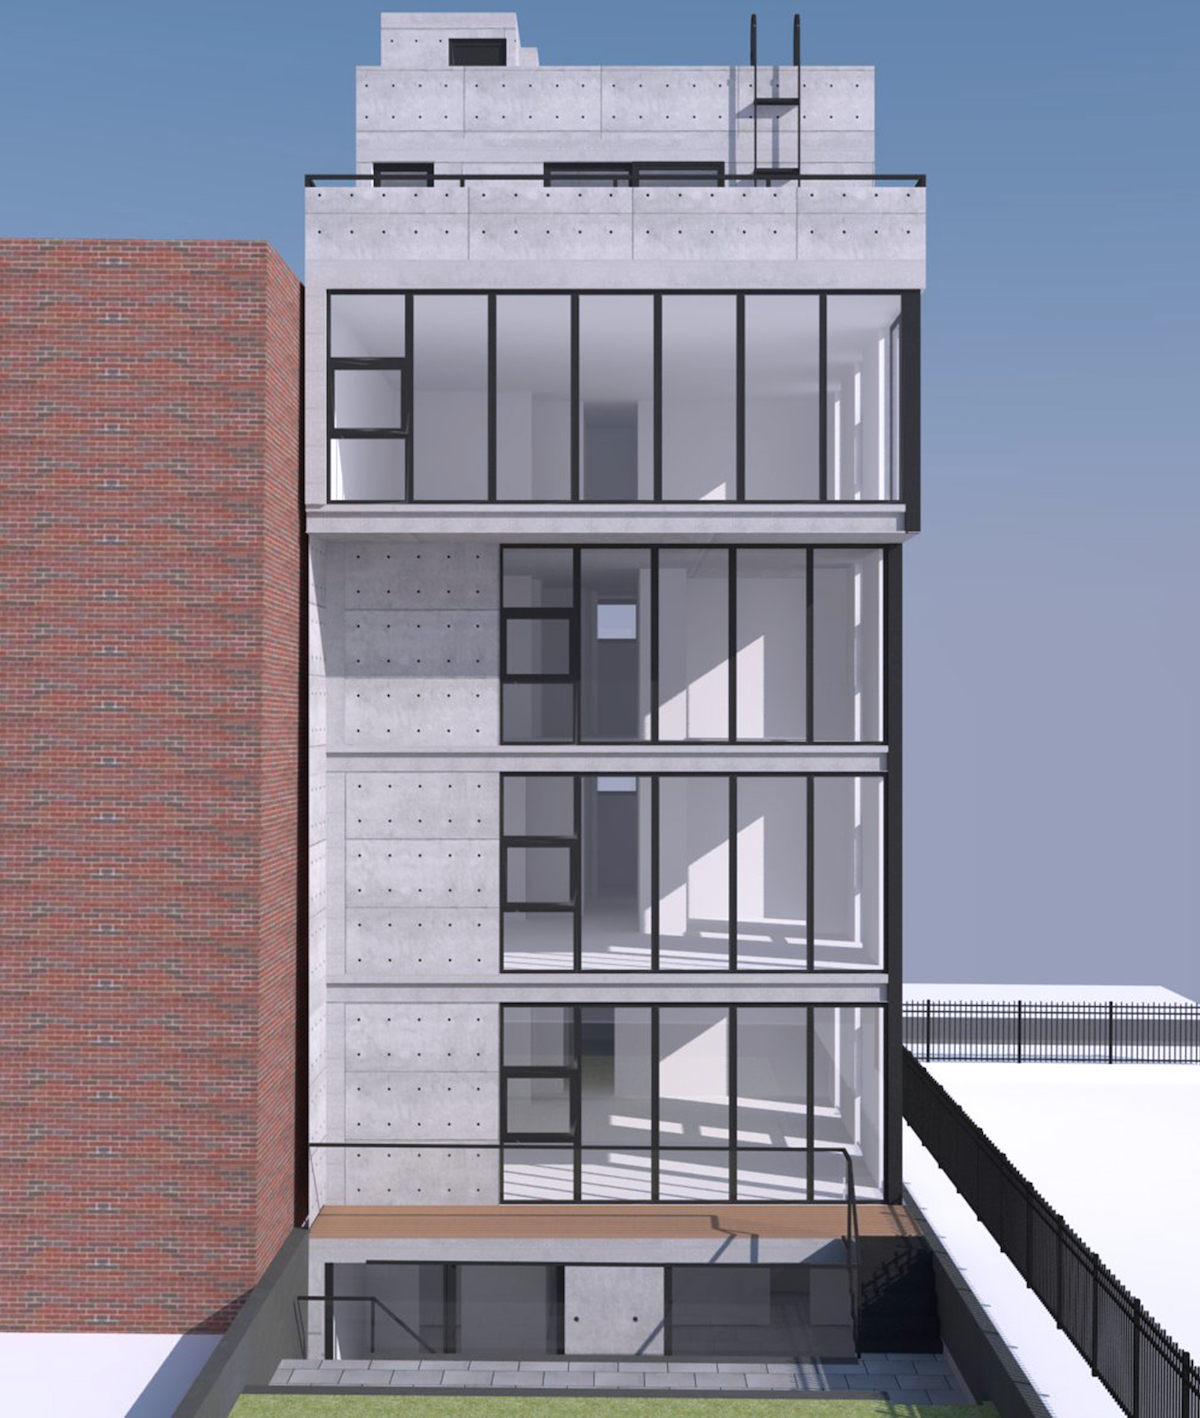 Rear view of 371 Baltic Street, rendering by Atelier New York Architecture